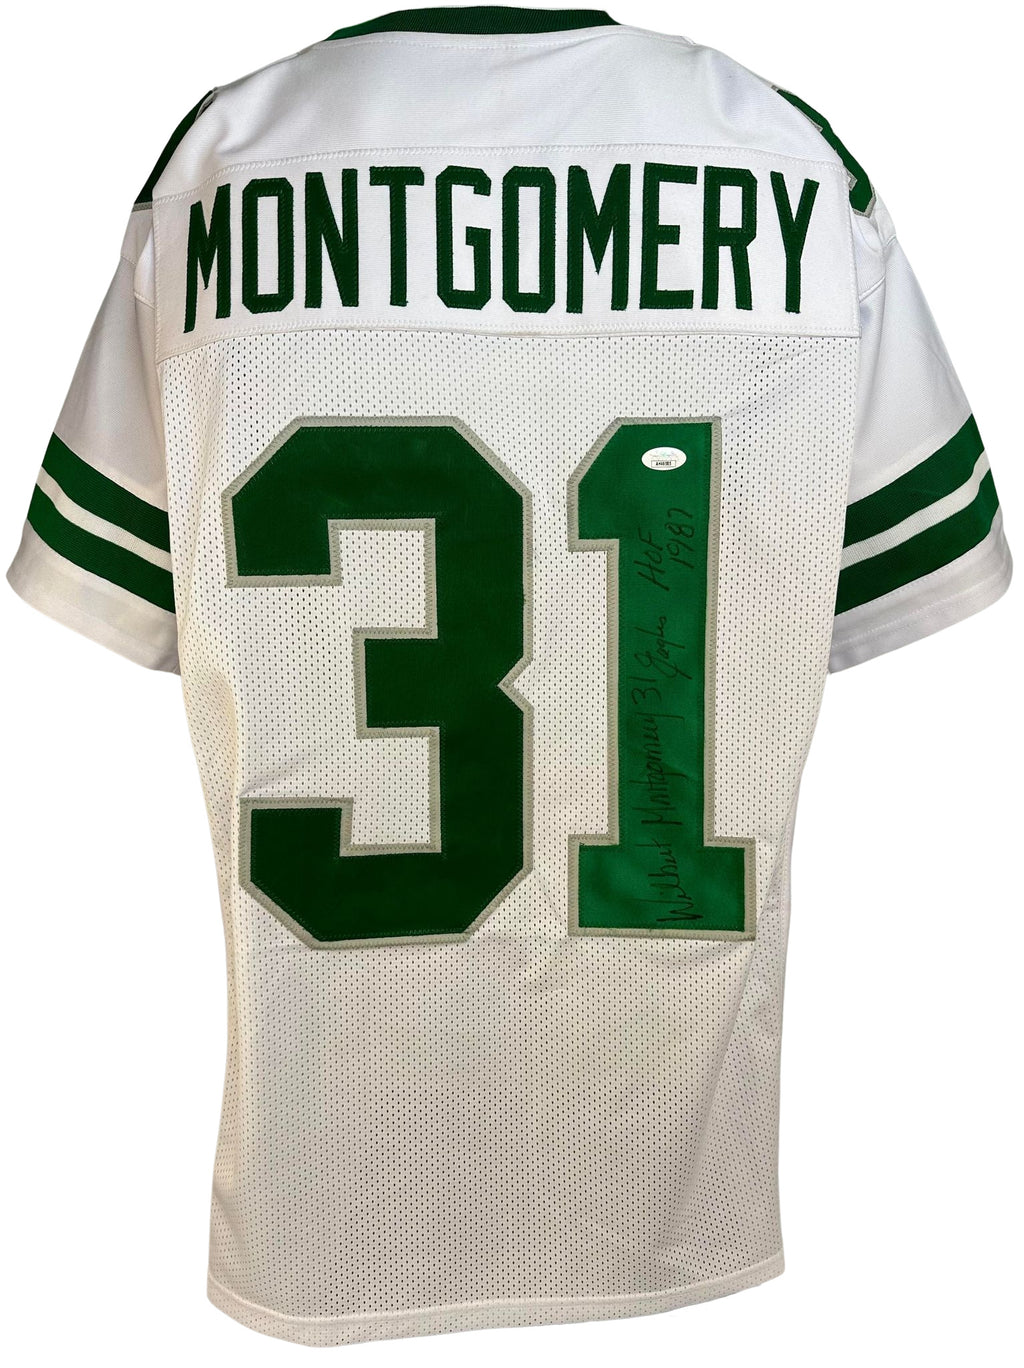 WILBERT MONTGOMERY AUTOGRAPHED INSCRIBED GREEN PRO STYLE JERSEY JSA